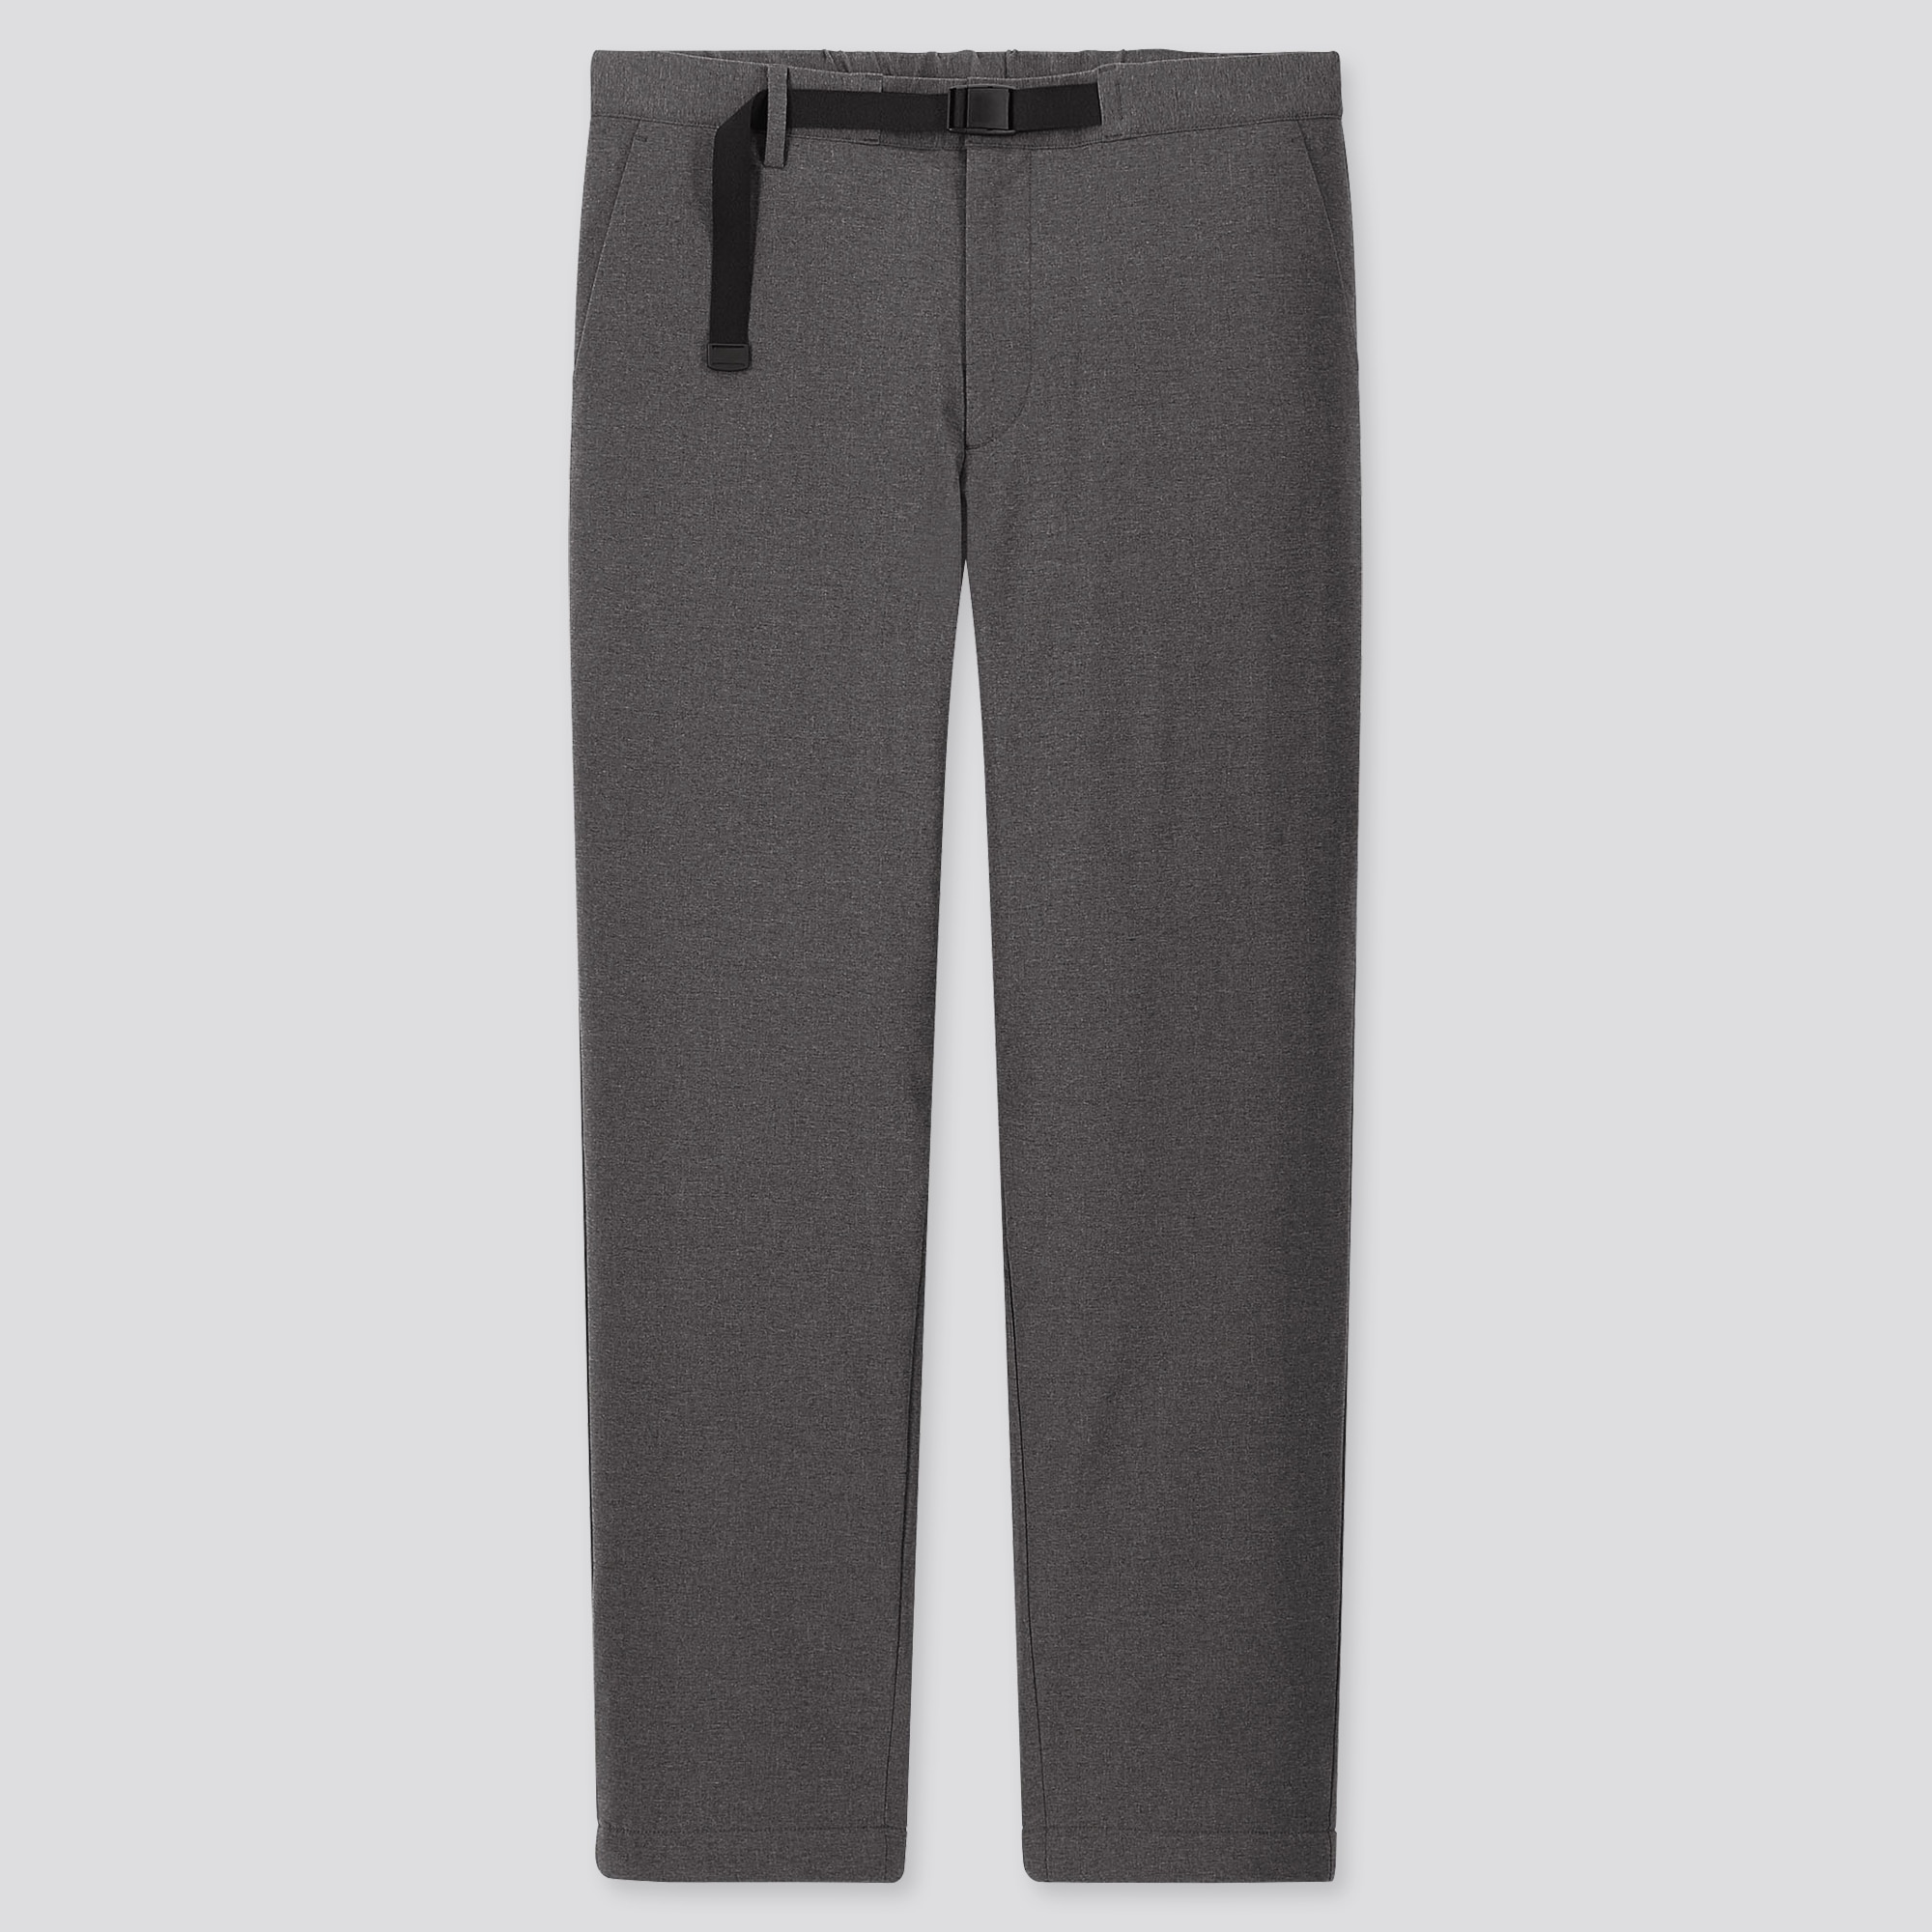 MEN WINDPROOF EXTRA WARM-LINED PANTS | UNIQLO US